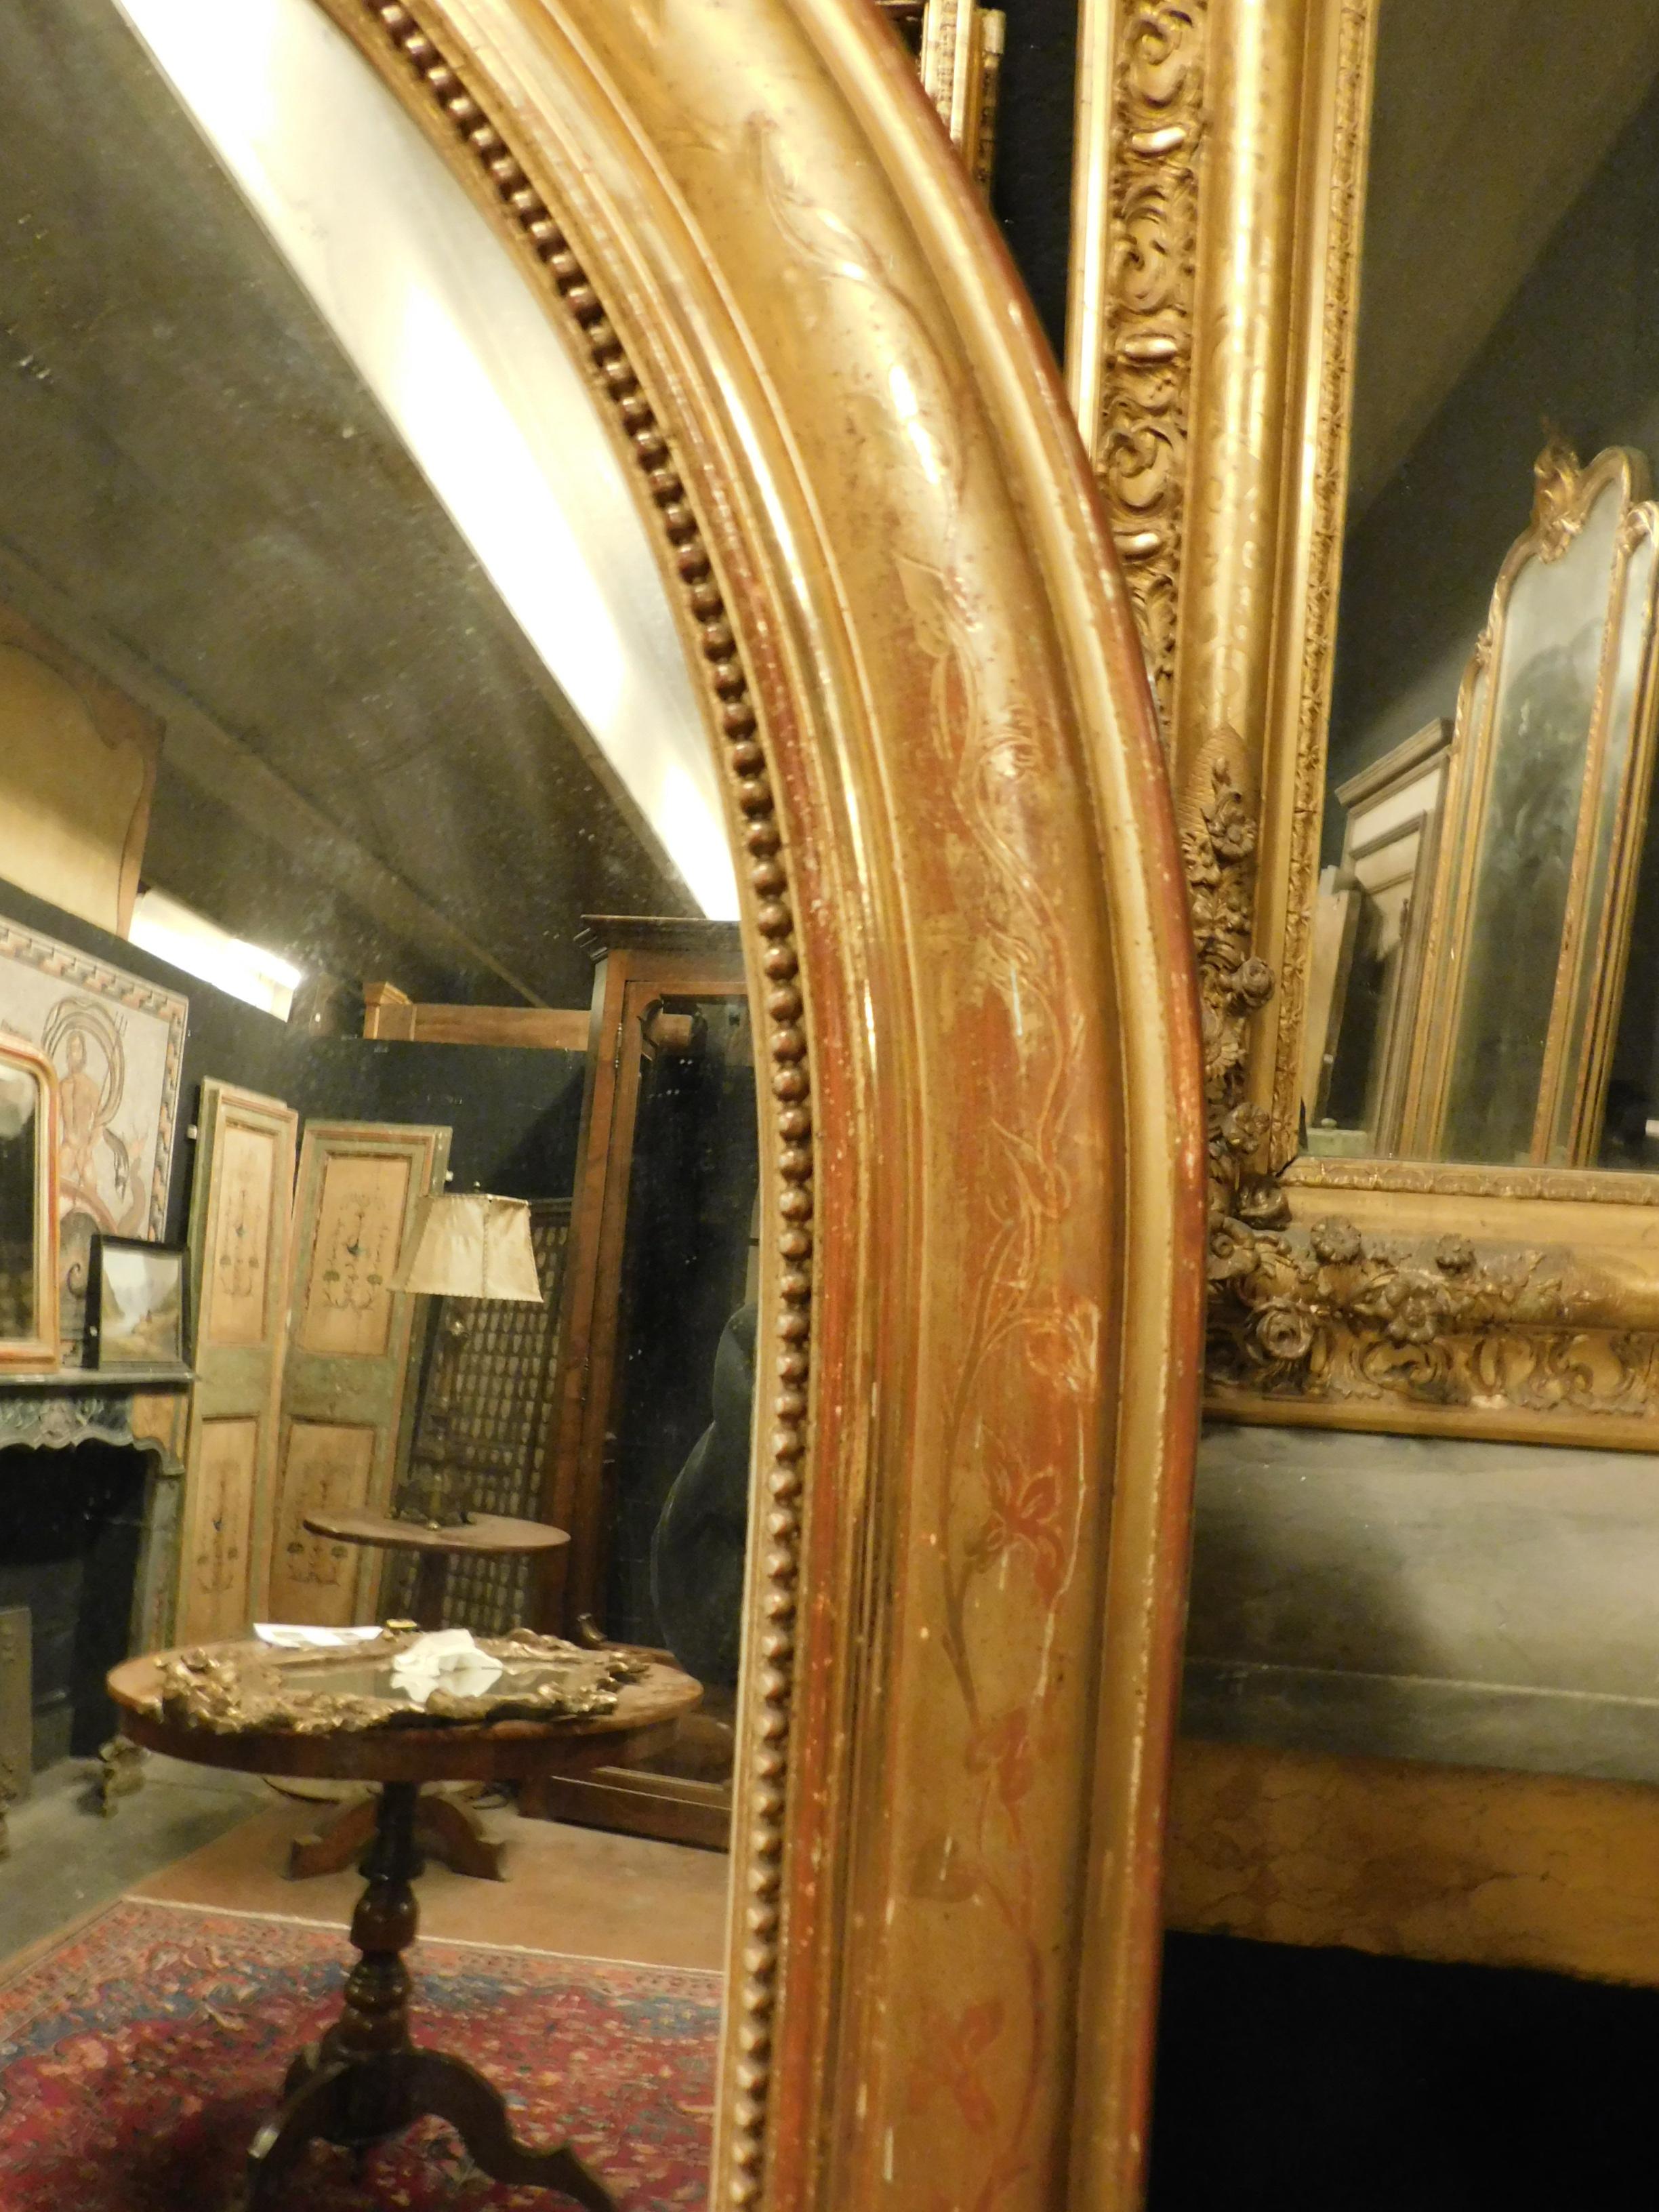 Gilt Antique Arched Mirror with Golden Frame, 19th Century Italy